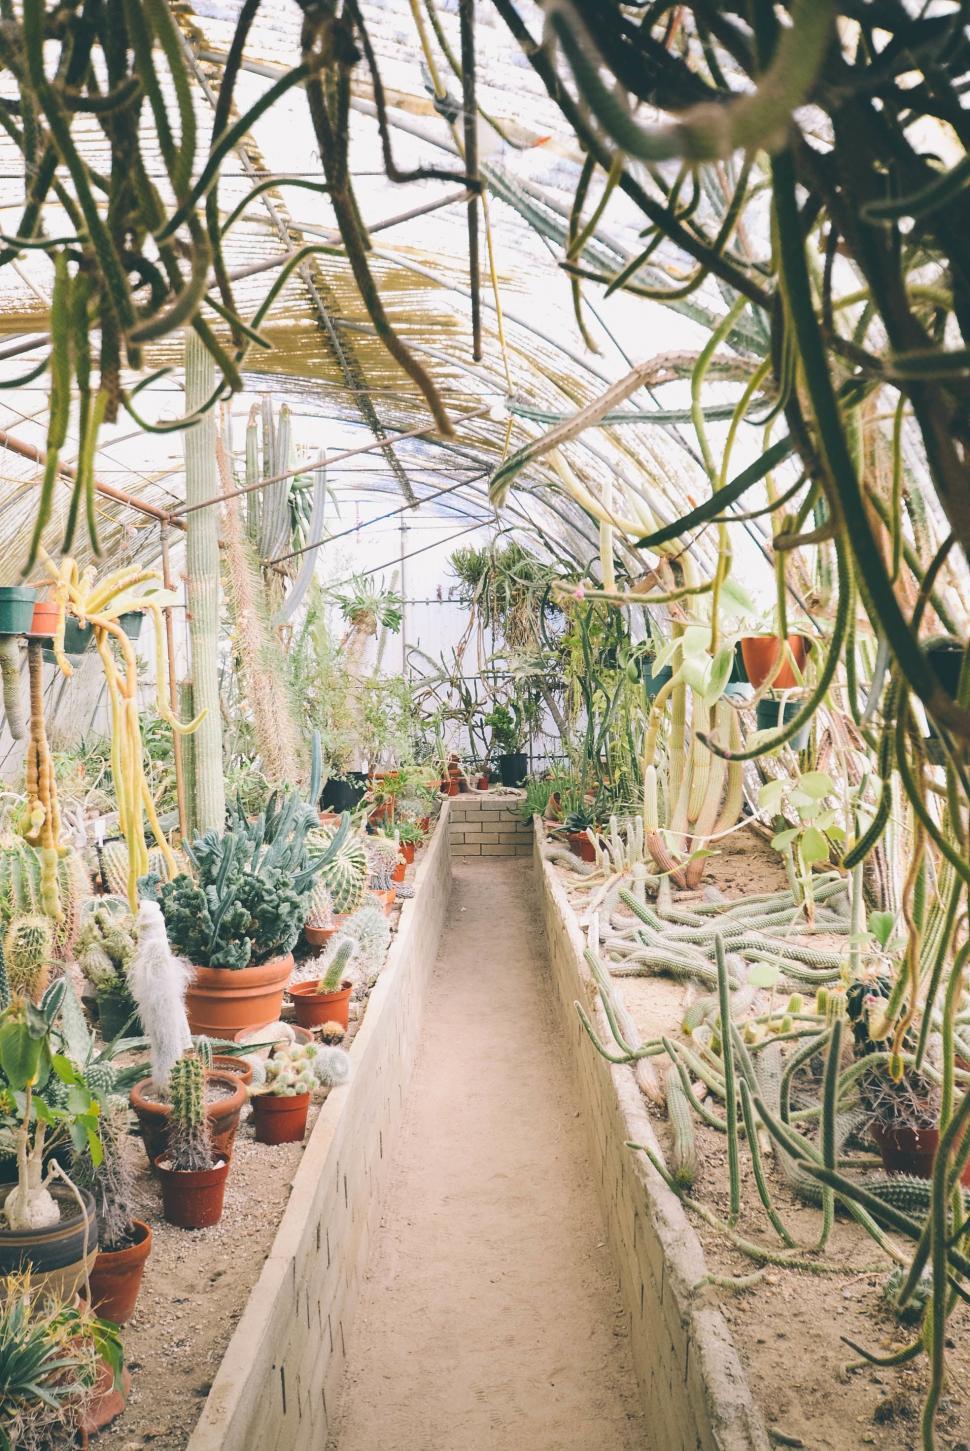 Free Image of Narrow Walkway in Greenhouse With Potted Plants 